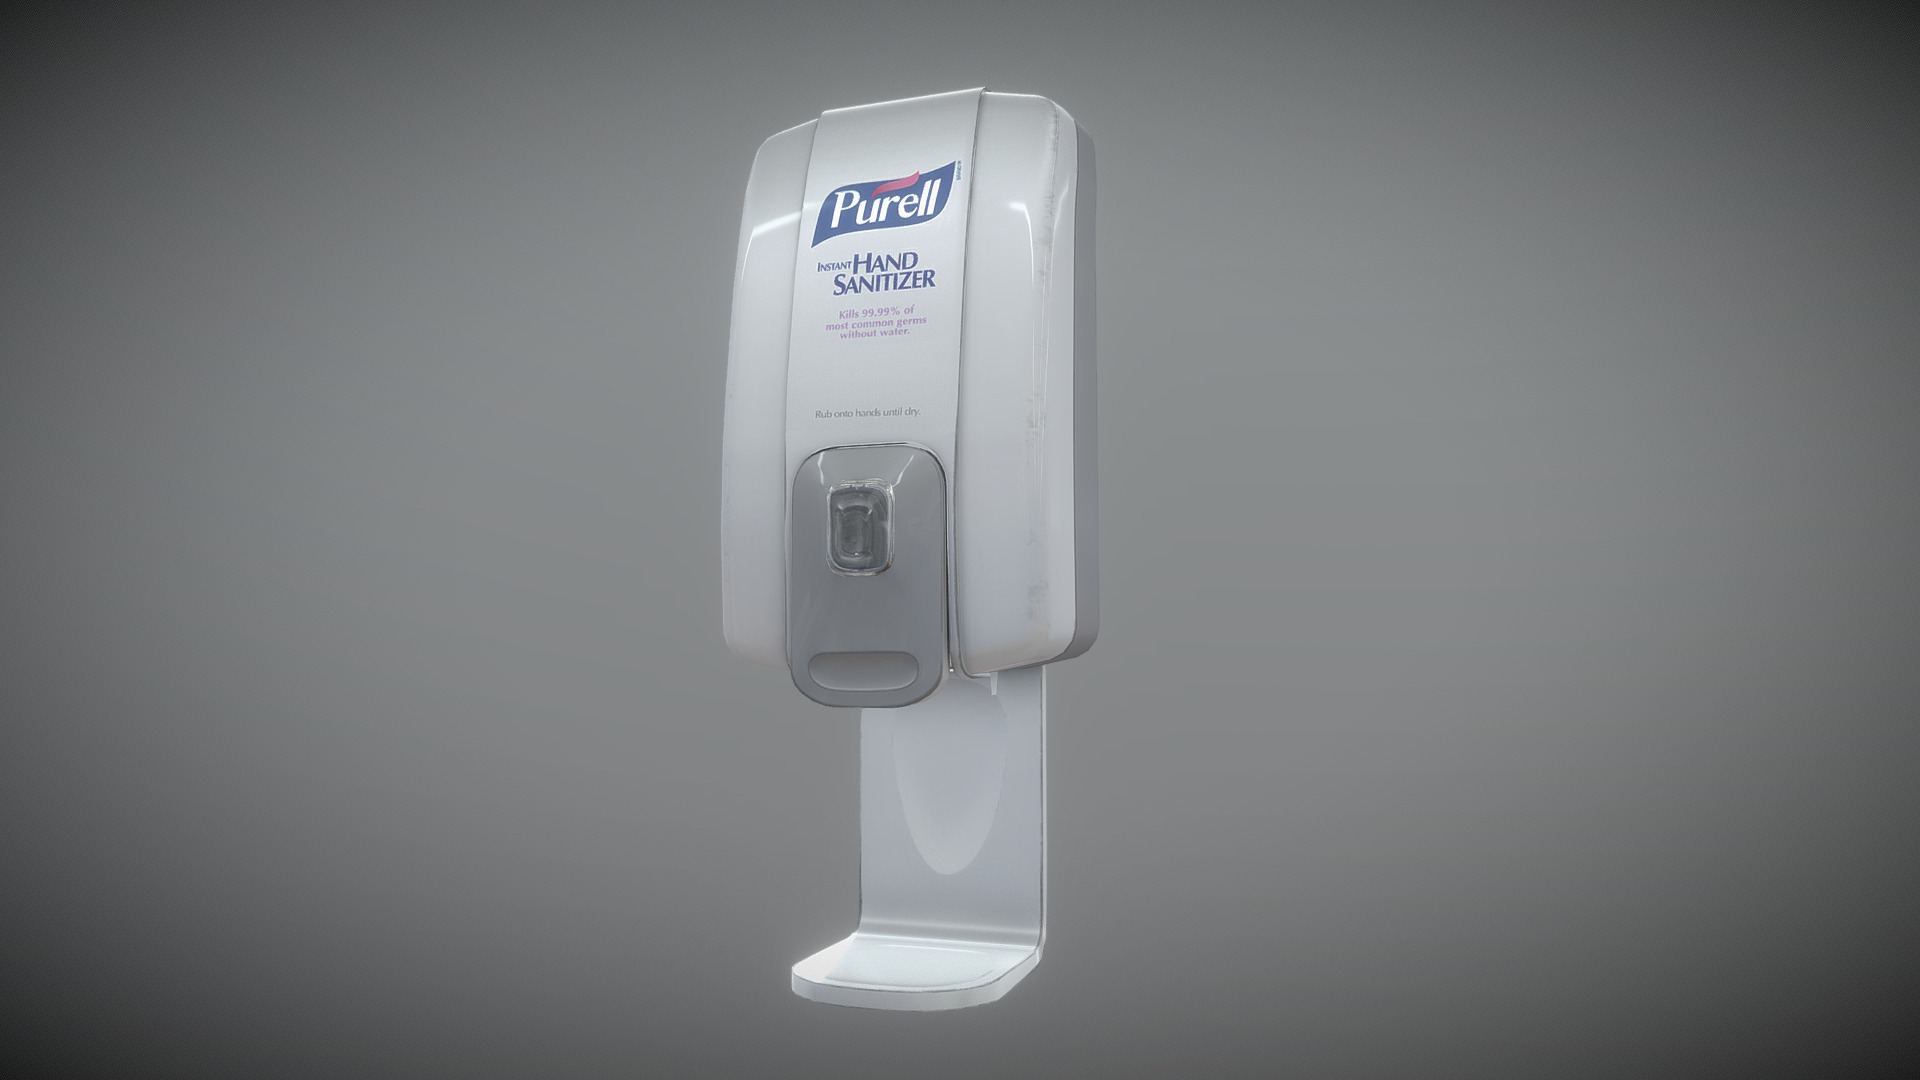 3D model Purell Hand Sanitizer both low and high poly - This is a 3D model of the Purell Hand Sanitizer both low and high poly. The 3D model is about a white light switch.